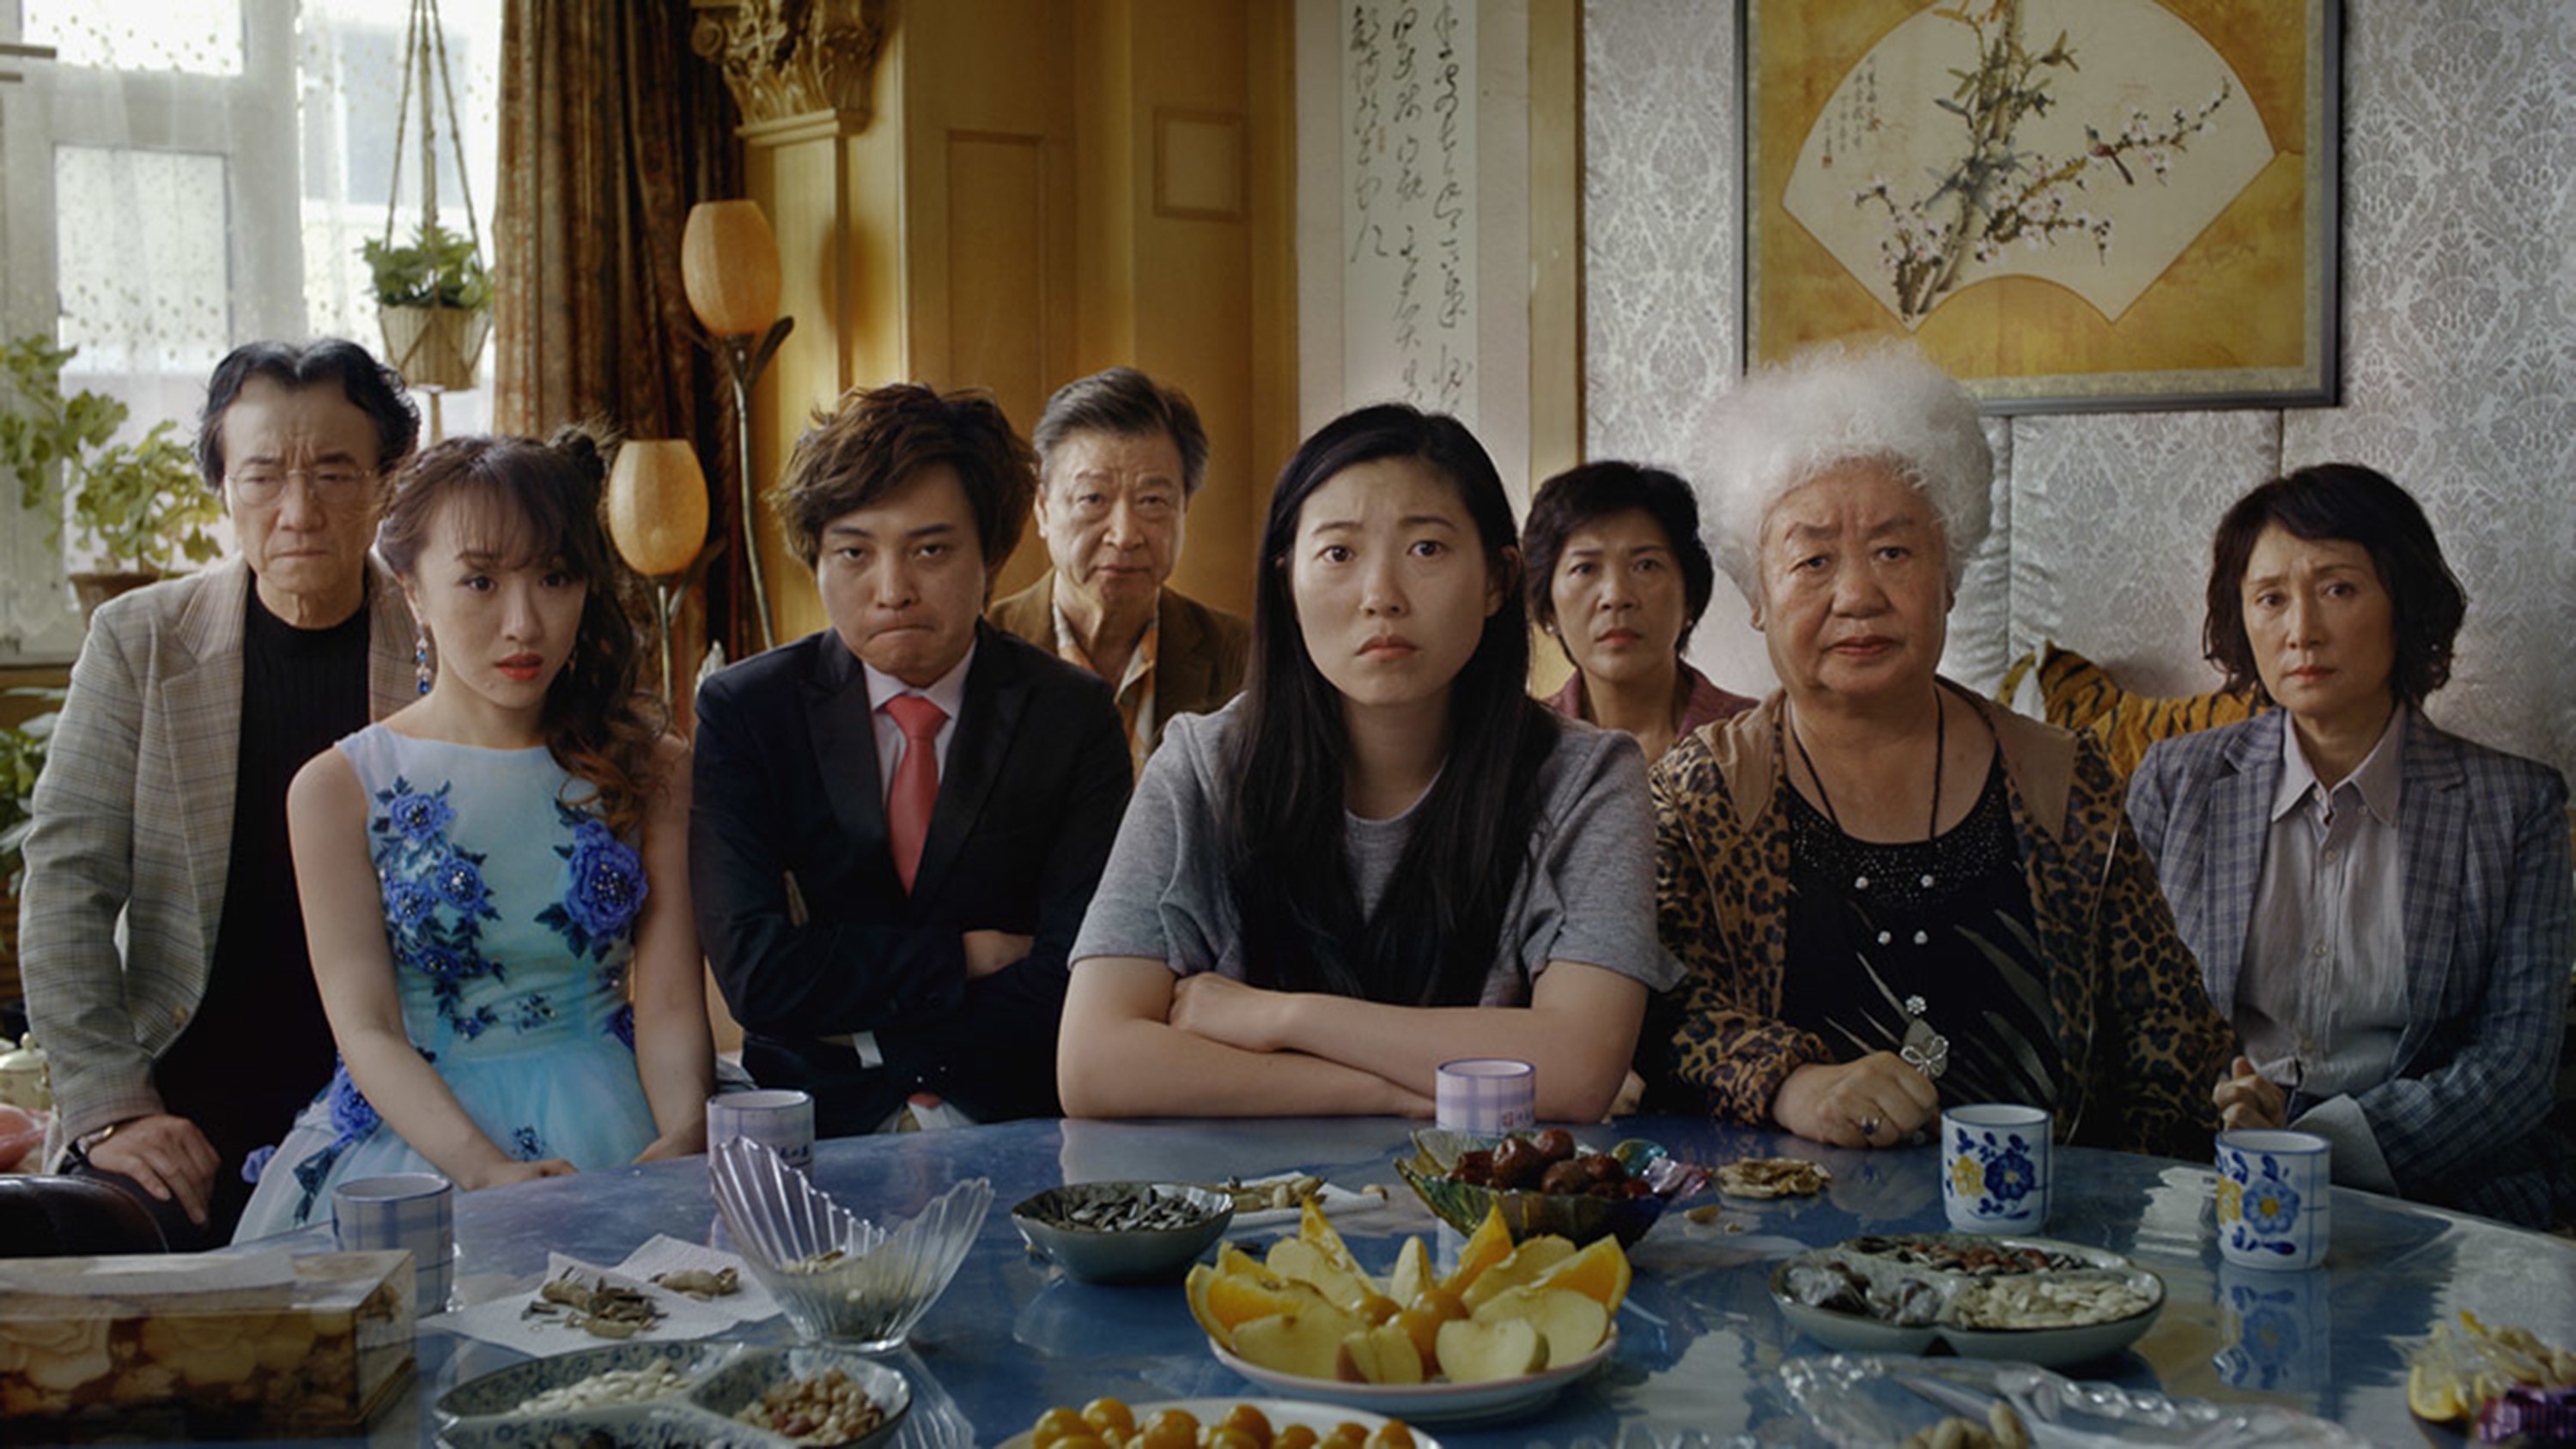 A still from The Farewell, the new film from director Lulu Wang. Photo: TNS